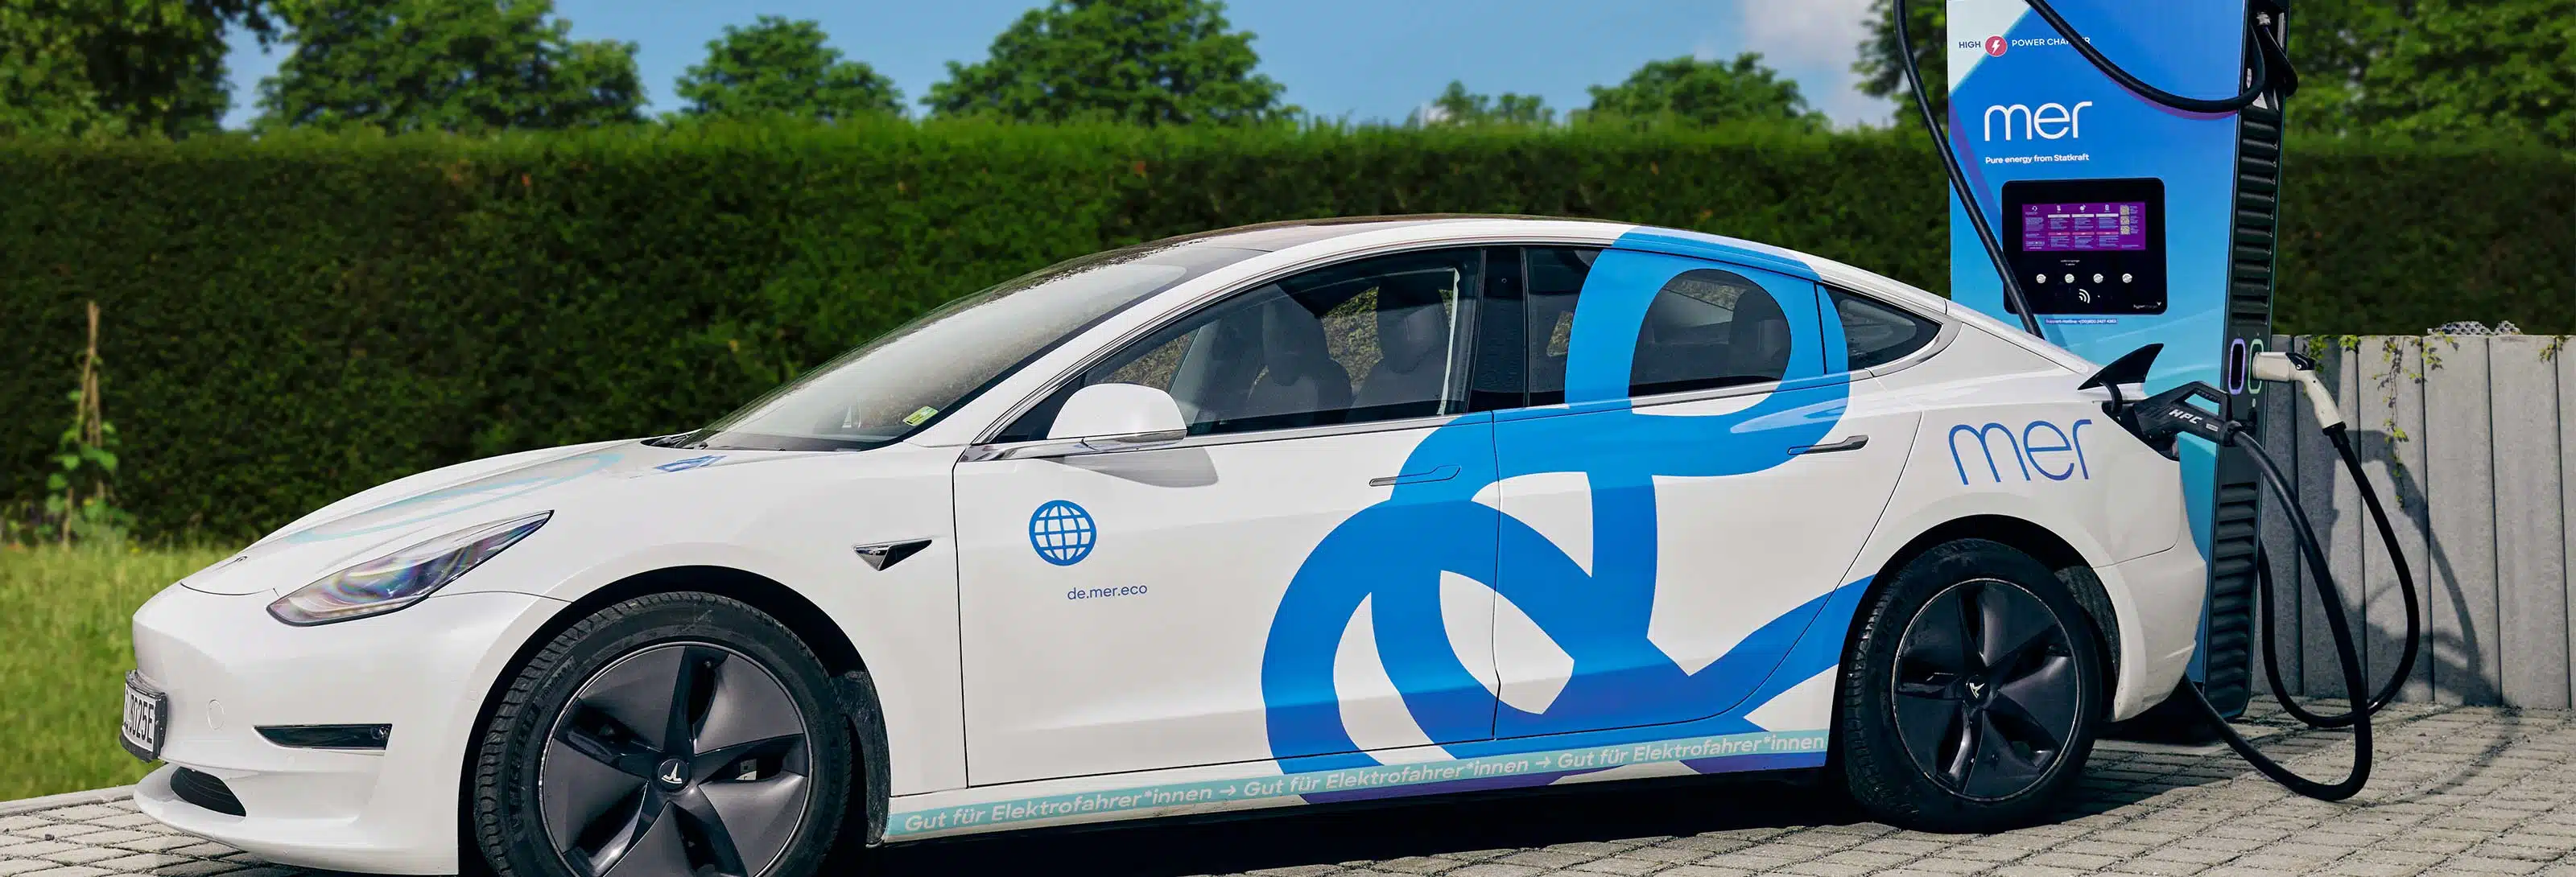 Electric Car Mer Solutions Germany